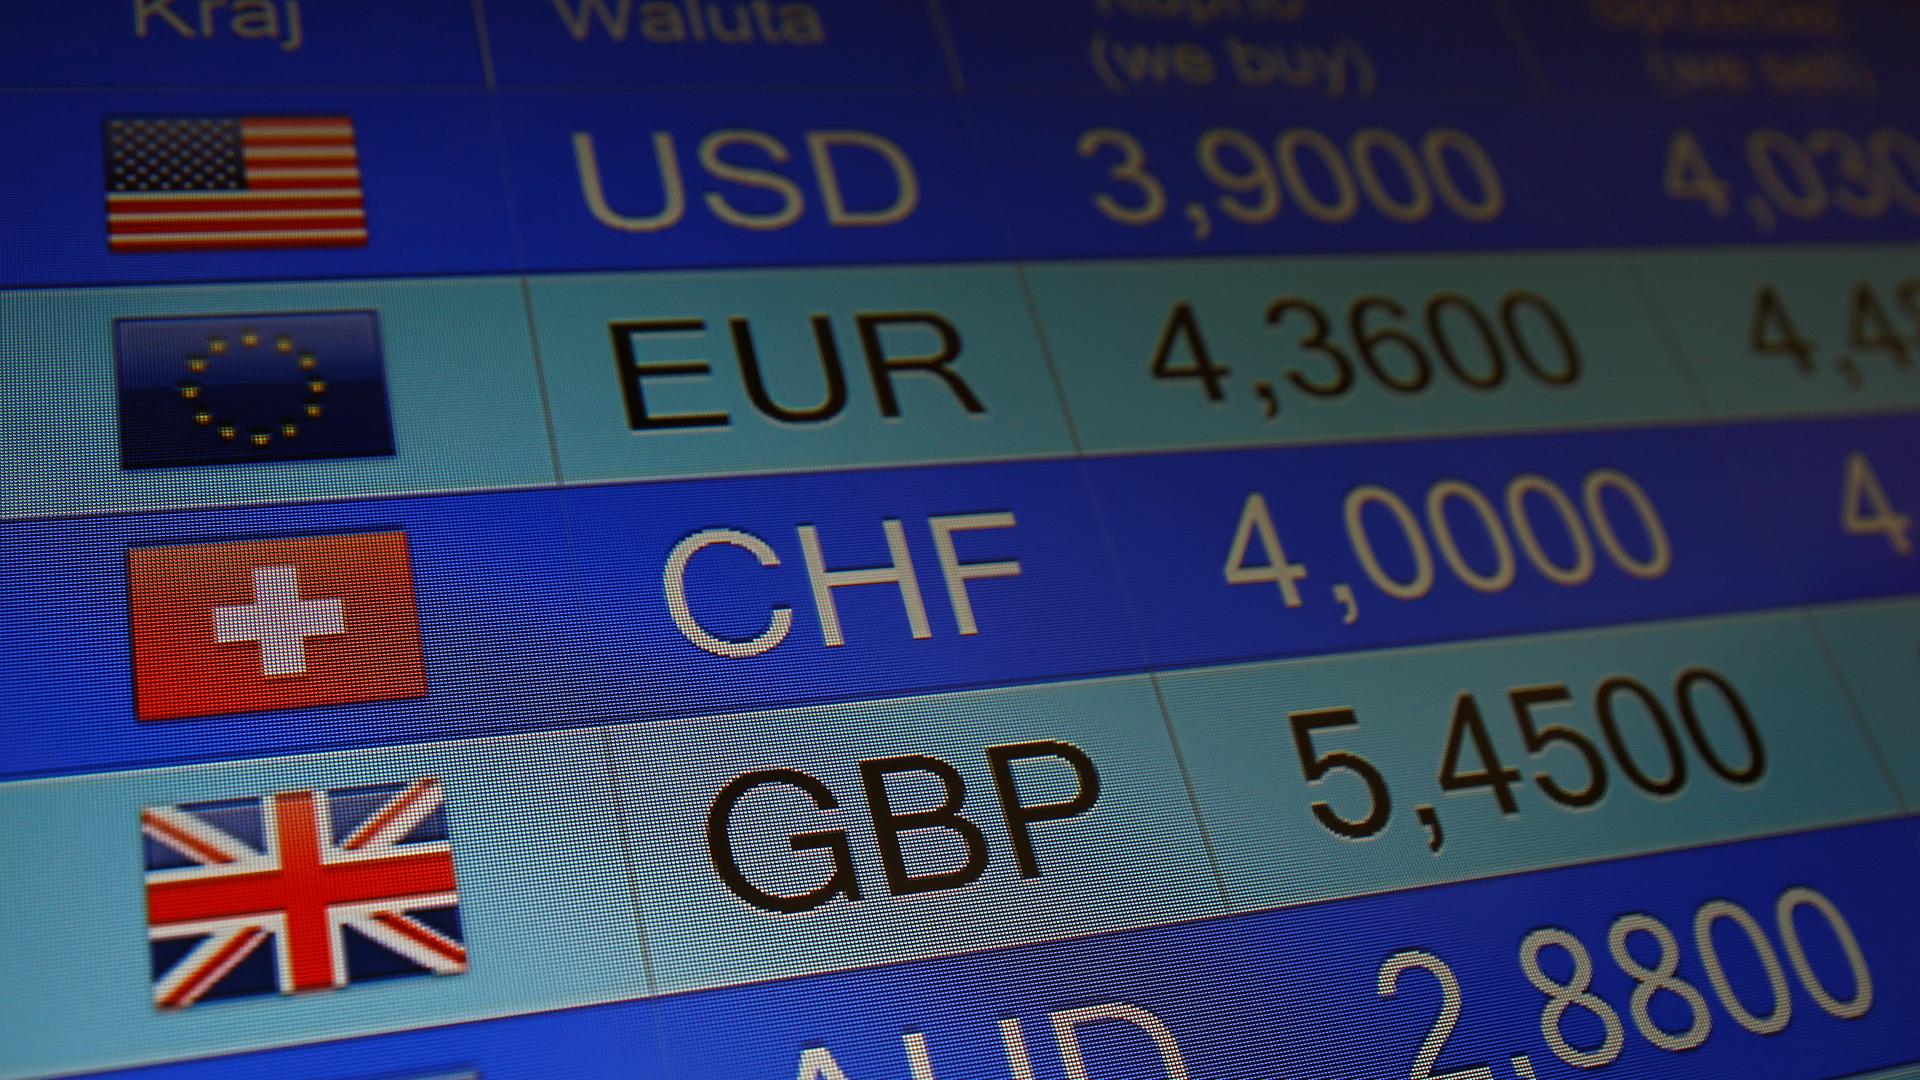 Rates of currencies, including British Pound, are displayed after Brexit referendum on an electronic board at a currency exchange in Warsaw, Poland. 